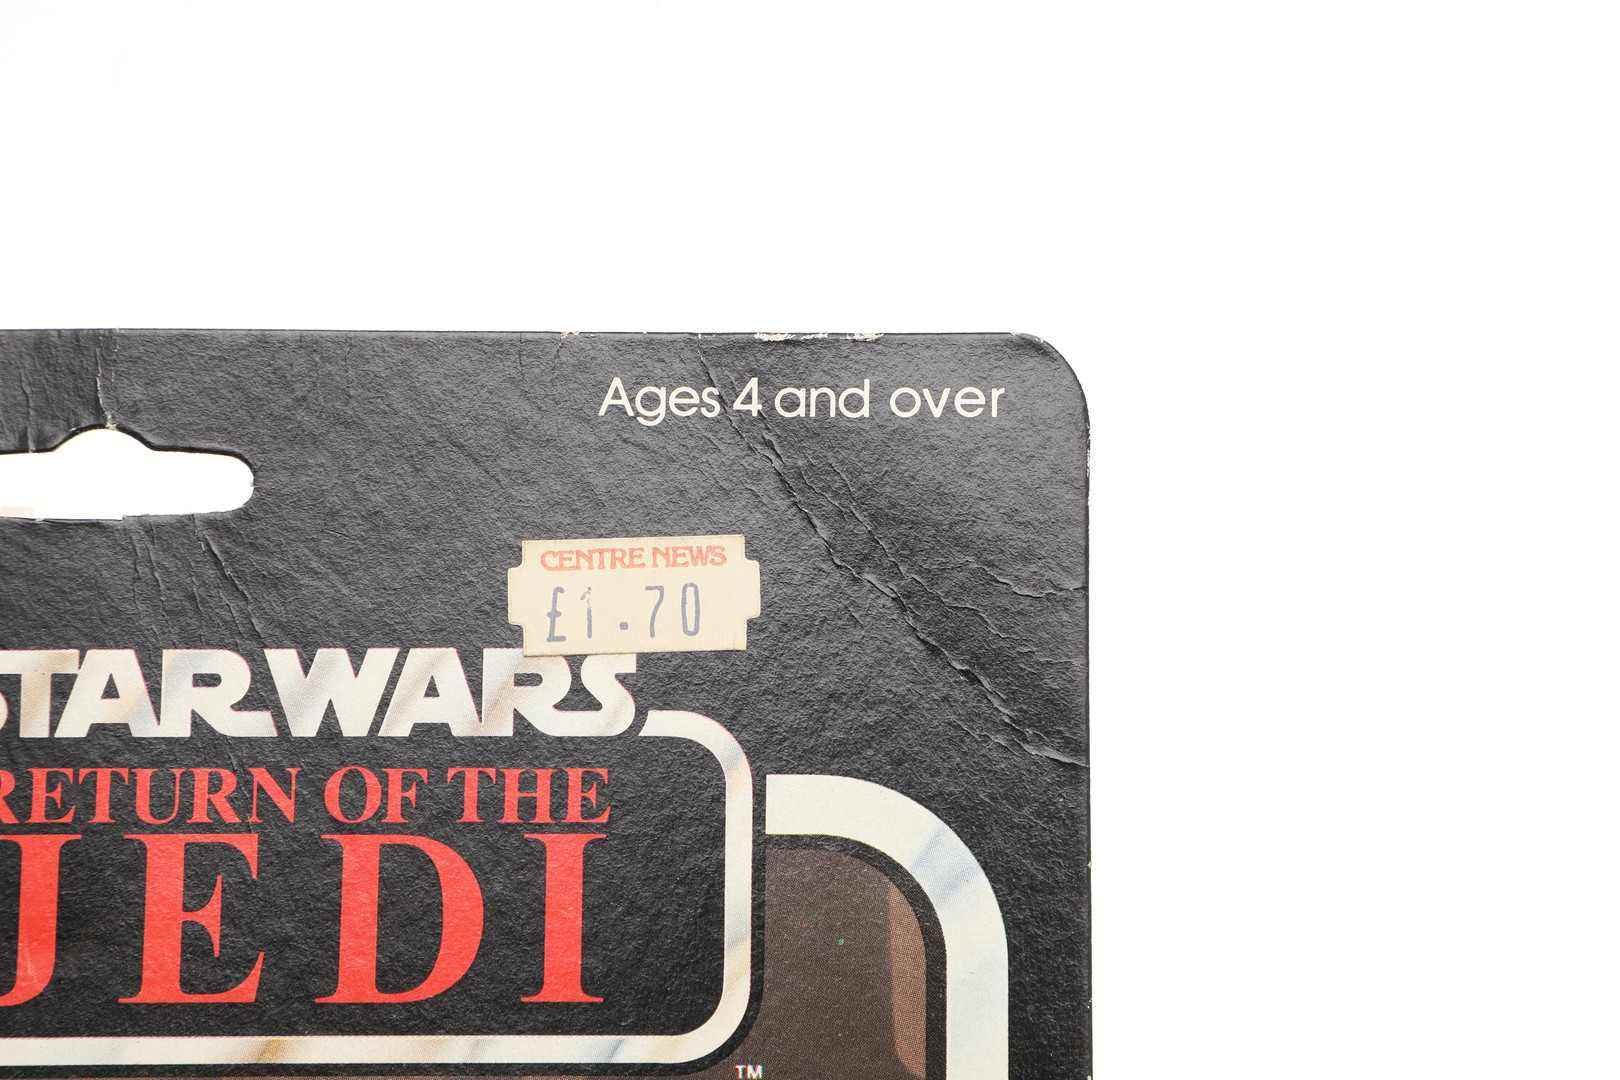 STAR WARS CARDED FIGURE BY PALITOY - DARTH VADER. - Image 3 of 8